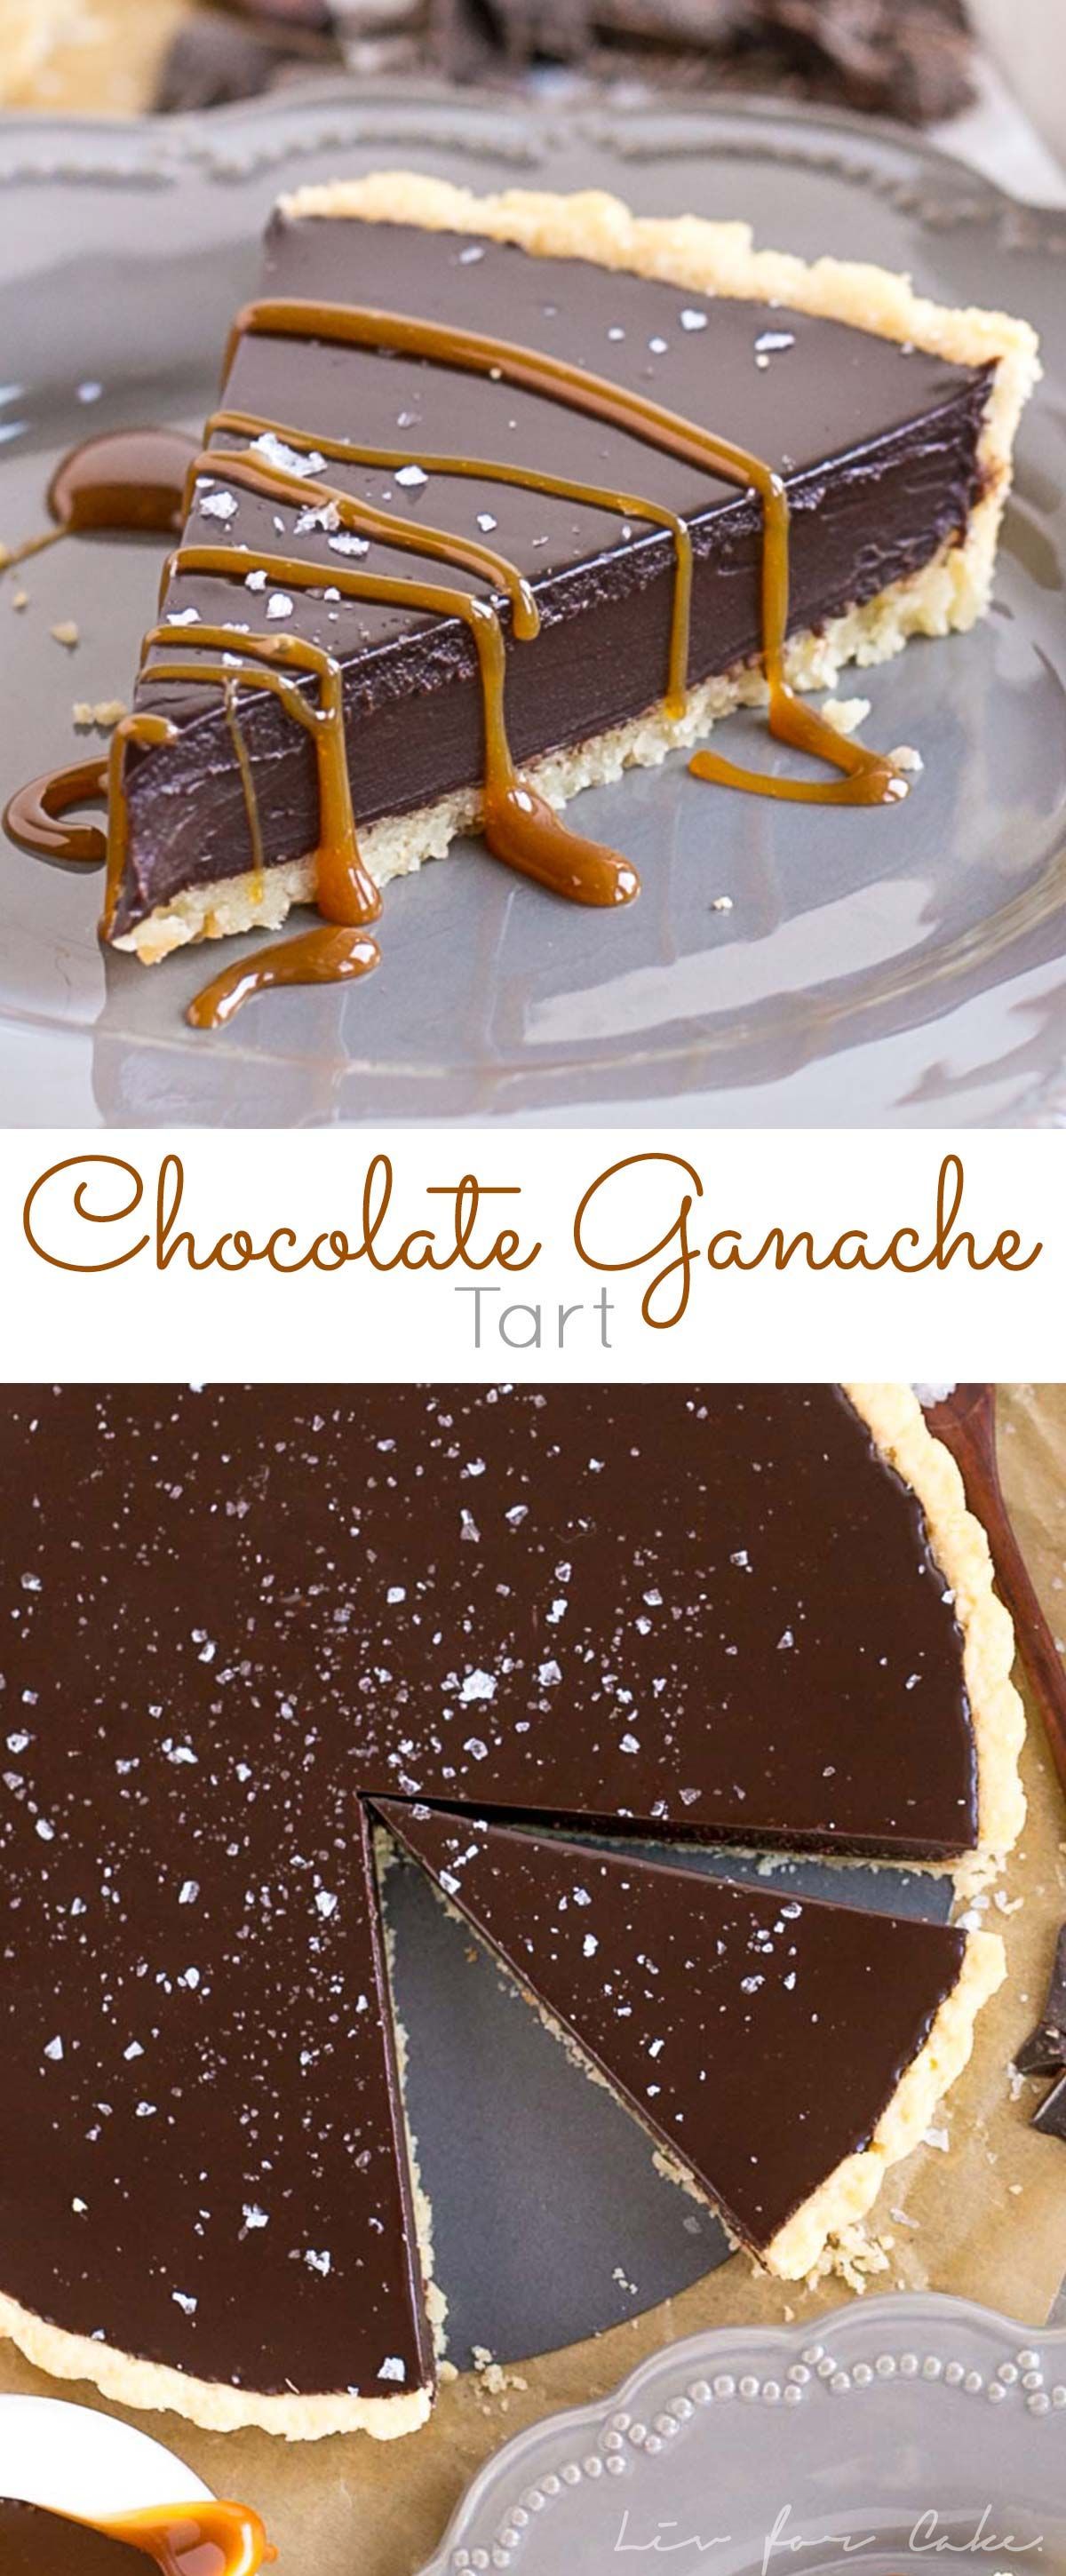 This simple and elegant Dark Chocolate Ganache Tart can be topped with anything you like, from a sprinkling of sea salt to dulce